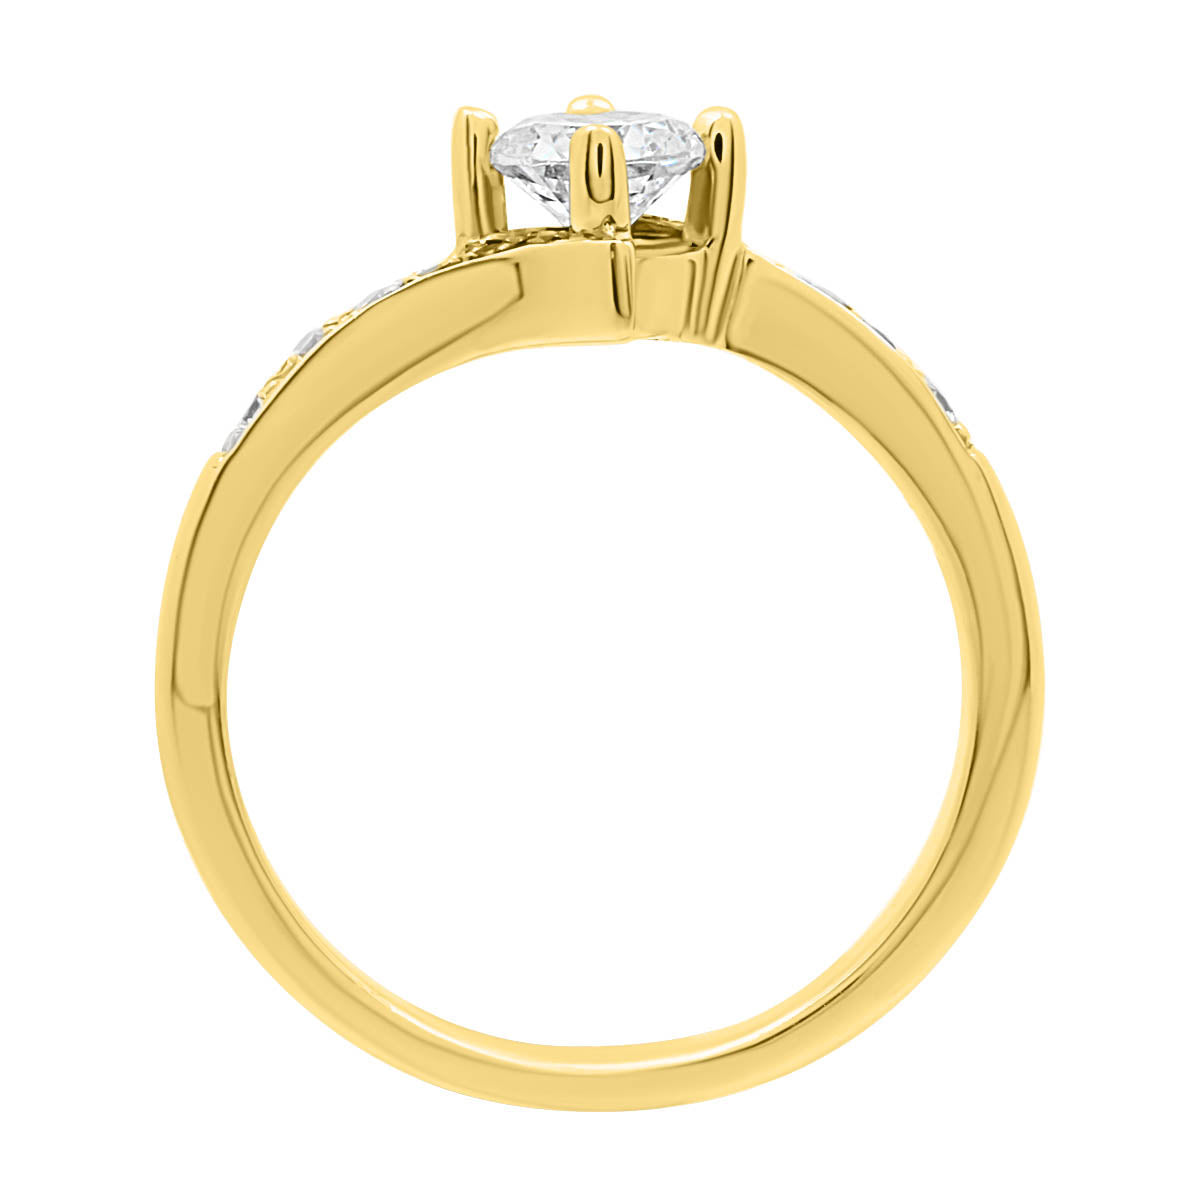 Quirky Diamond Engagement Ring in yellow gold and standing upright